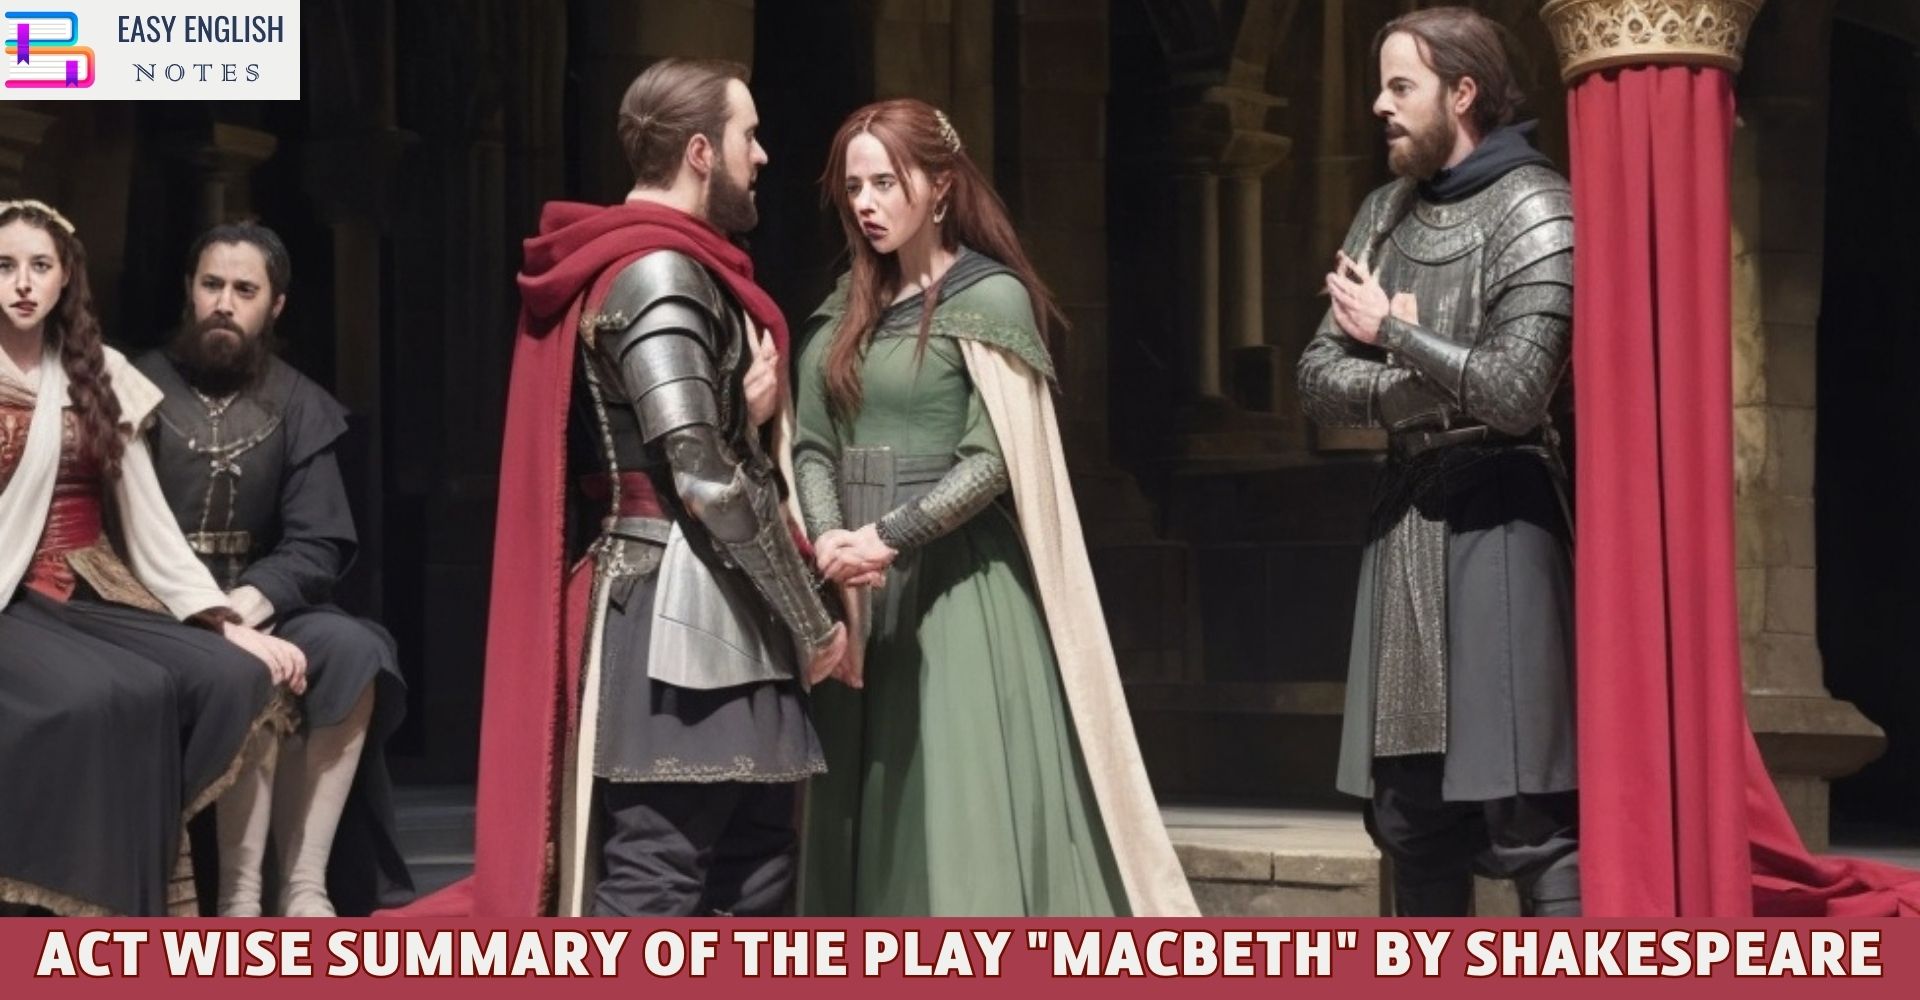 Act Wise Summary Of The Play "Macbeth" By Shakespeare